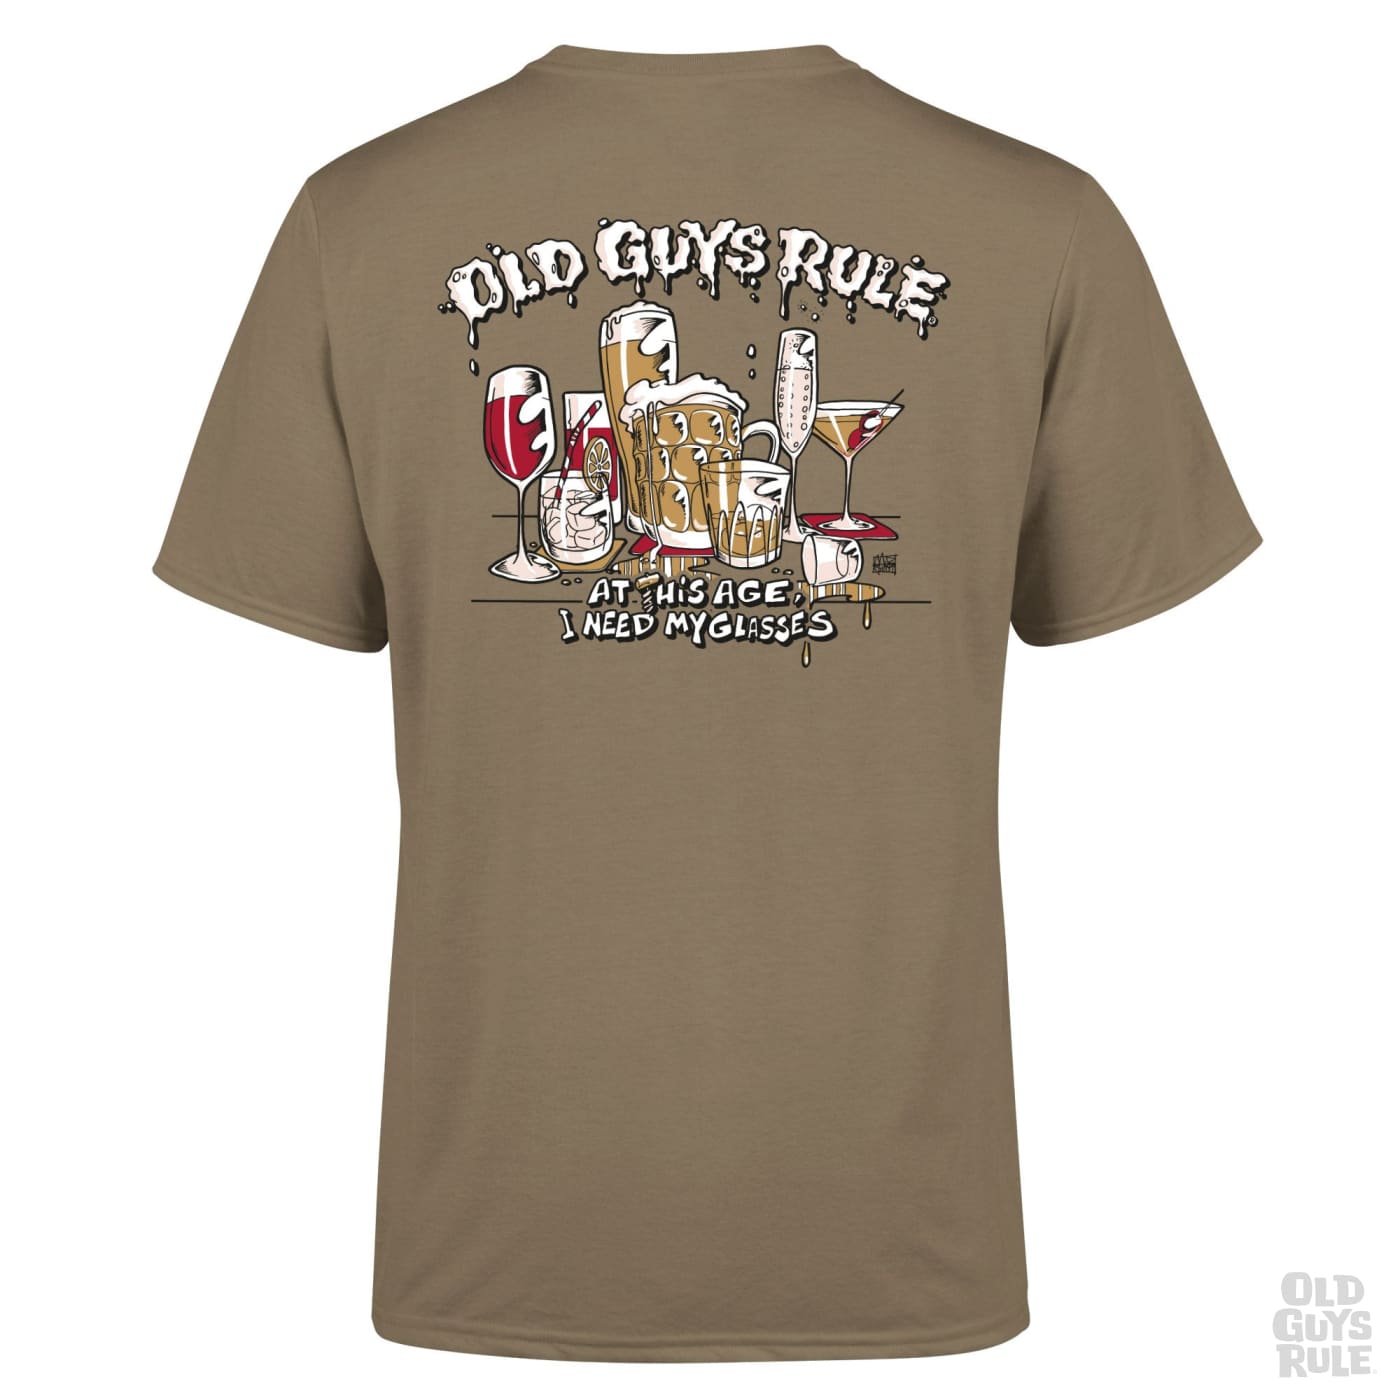 Old Guys Rule 'All T-Shirts' Complete Collection